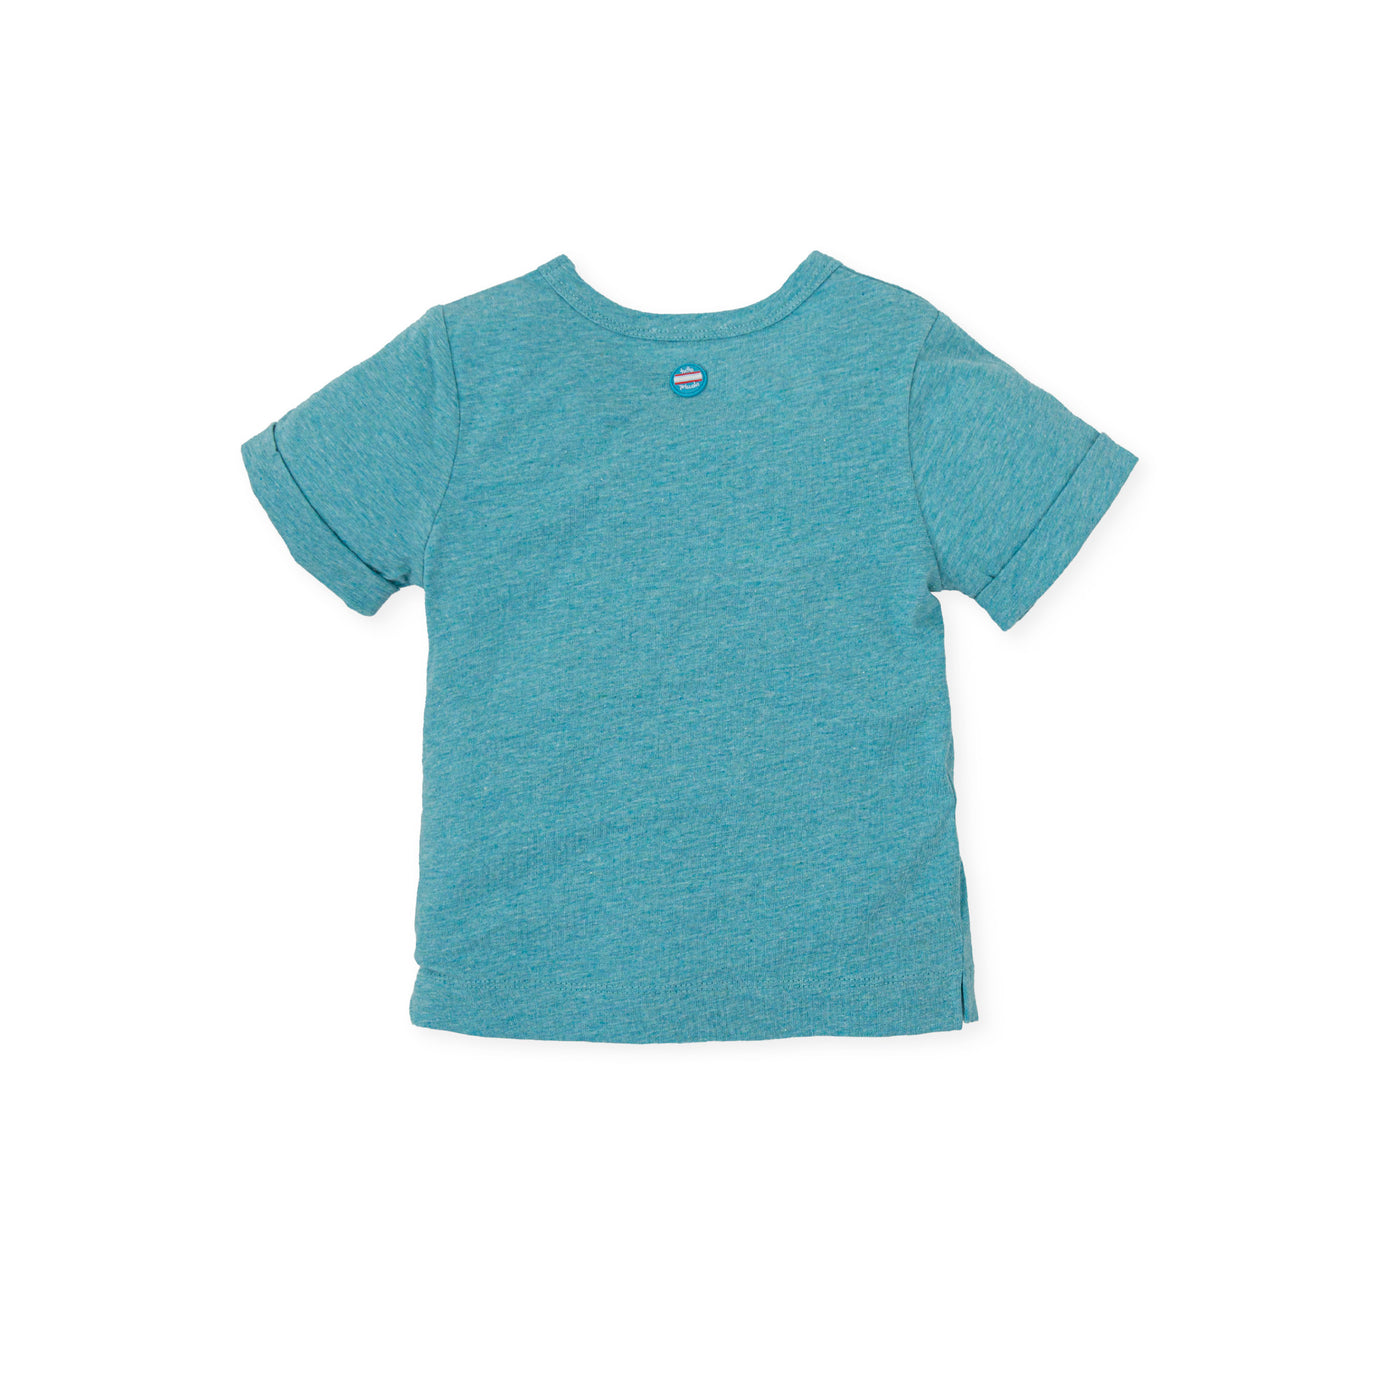 Turquoise T-Shirt By Tutto Piccolo